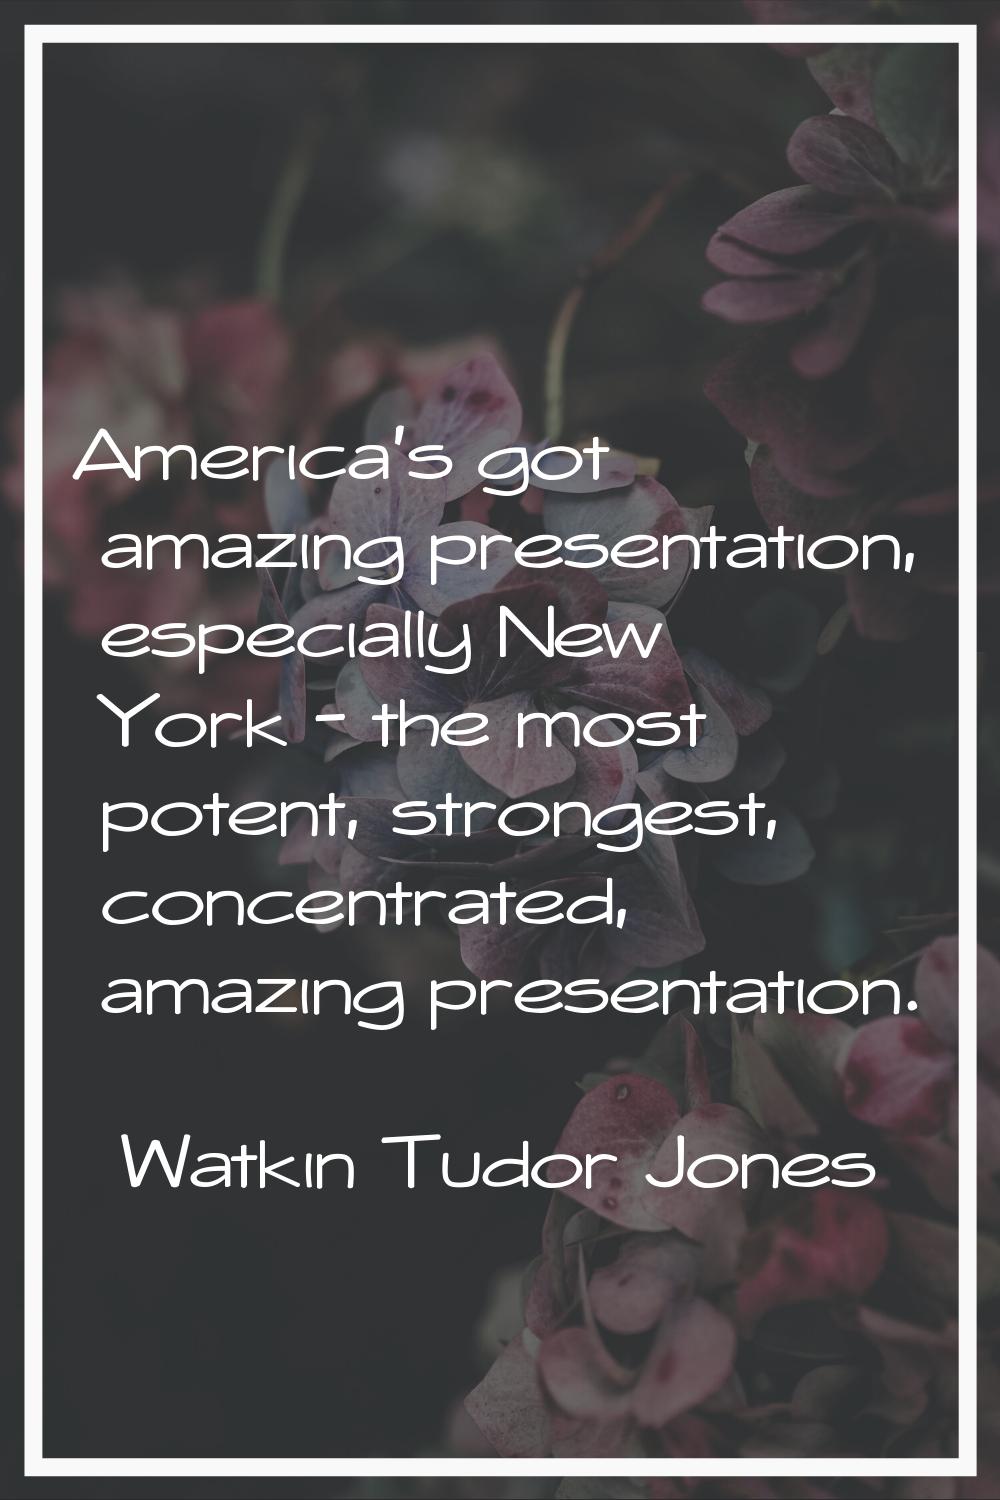 America's got amazing presentation, especially New York - the most potent, strongest, concentrated,